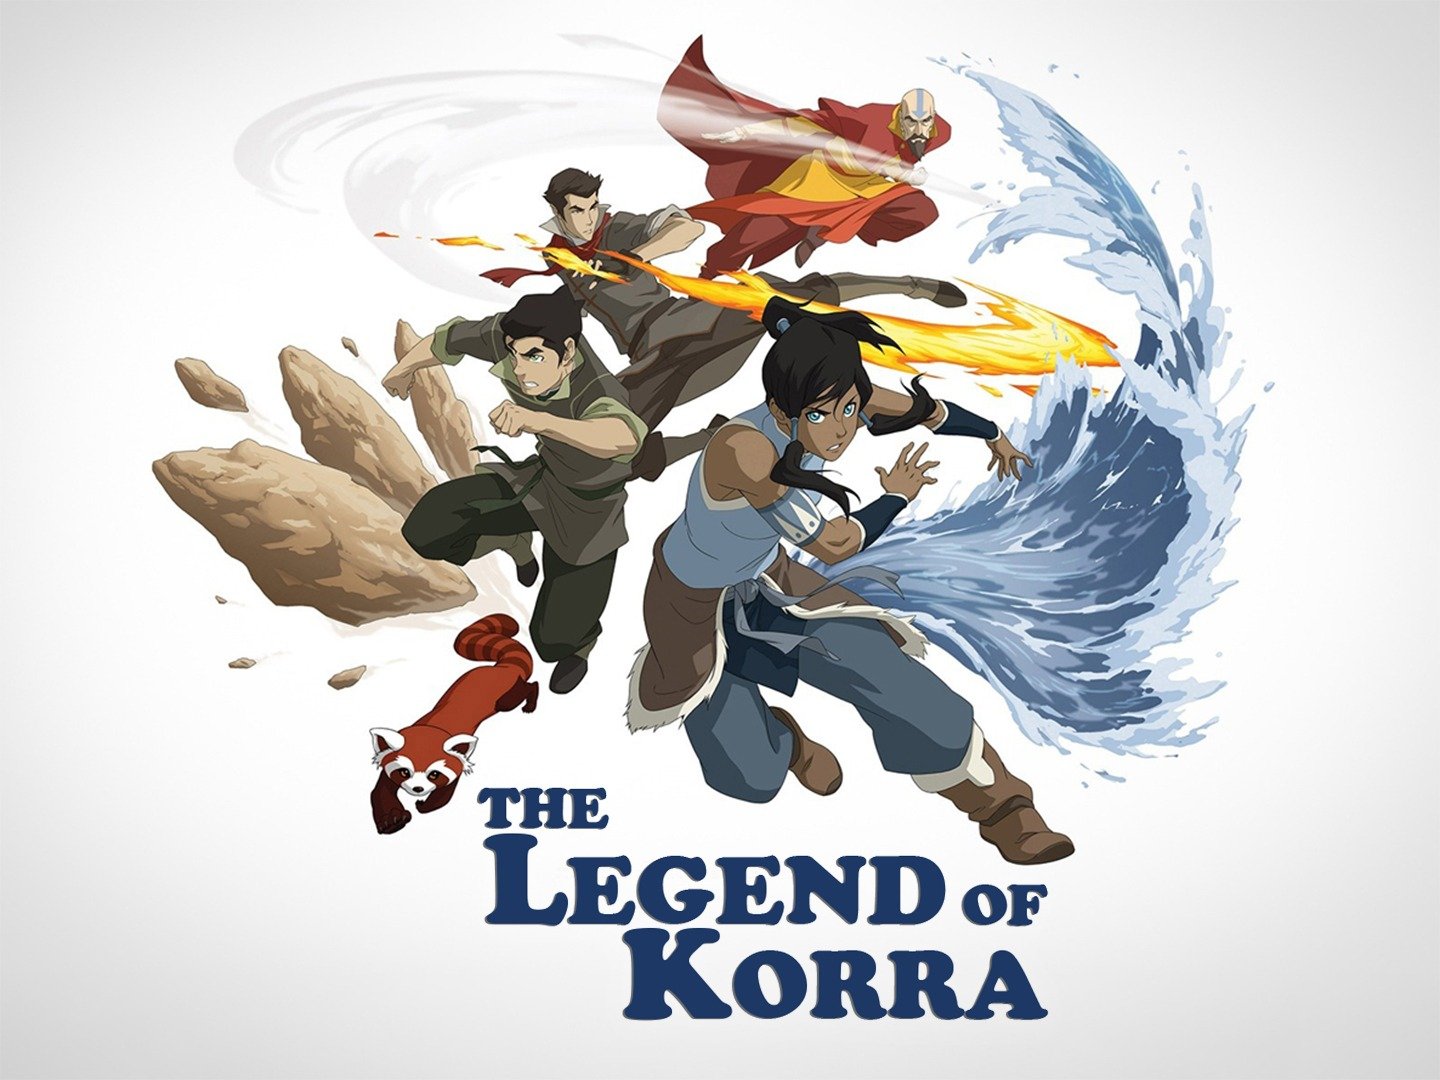 Avatar The Legend of Korra Is Better Than The Last Airbender